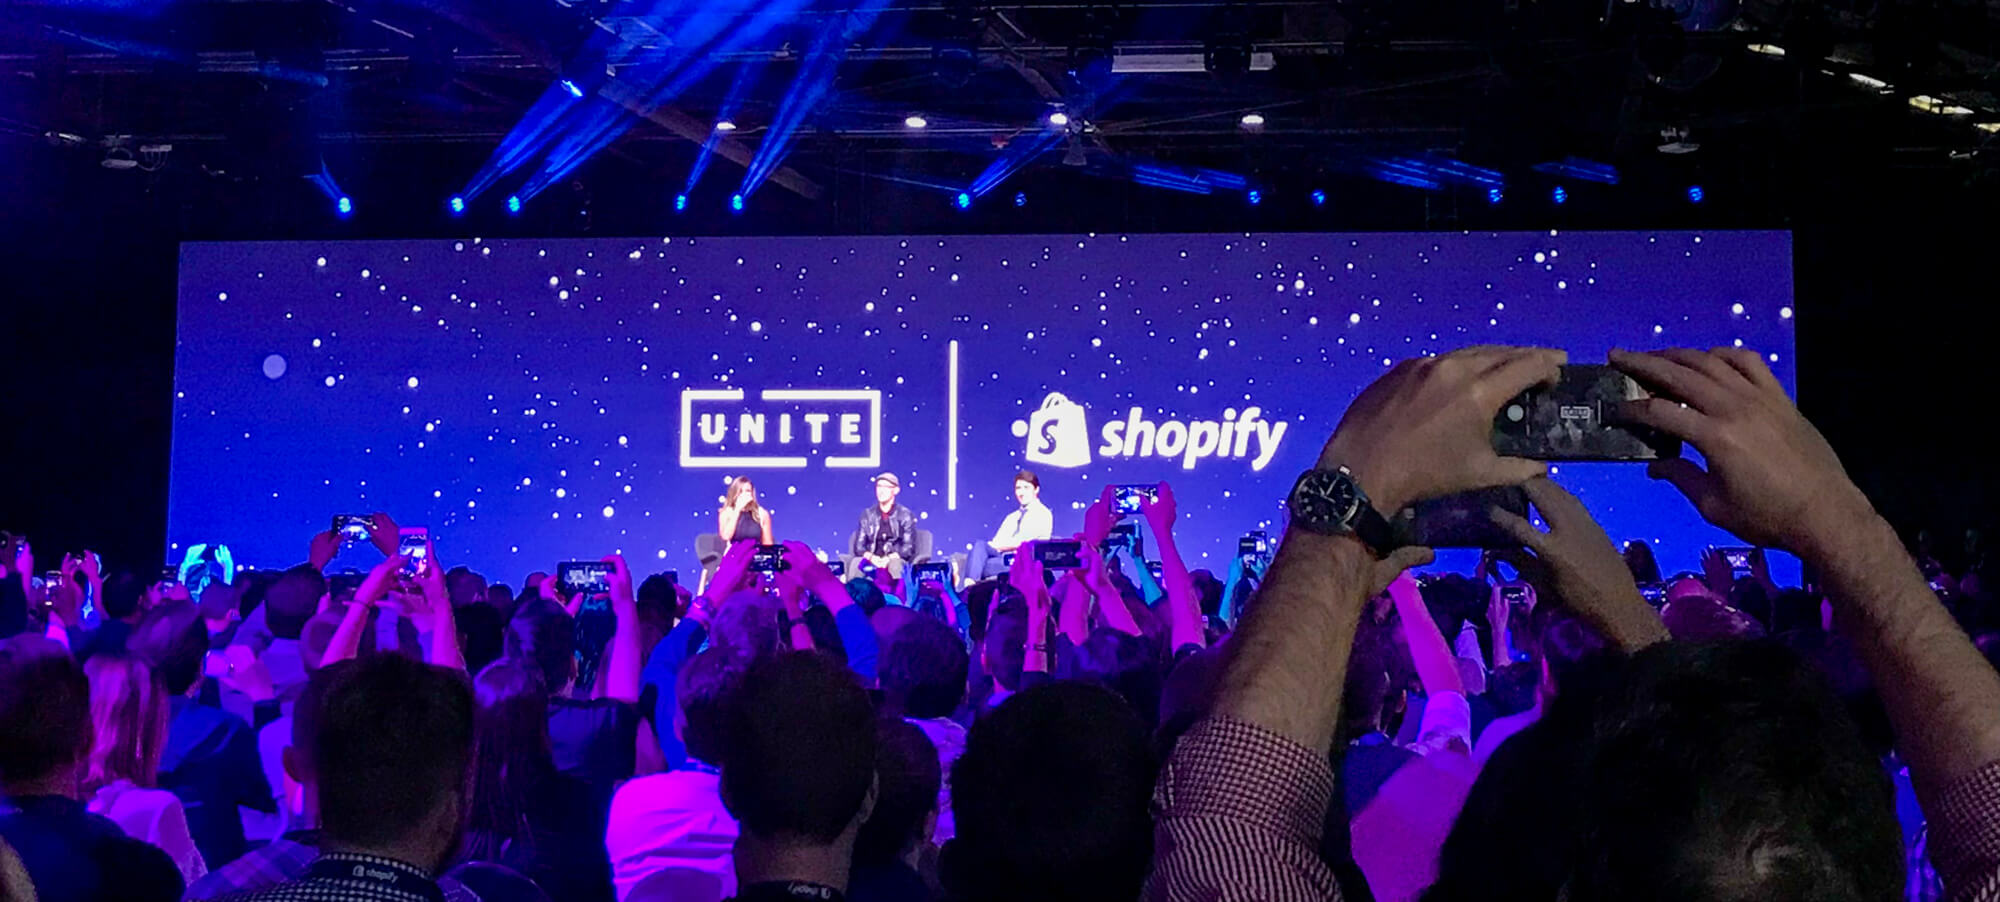 Shopify Unite 2018: We came, we saw, we learned